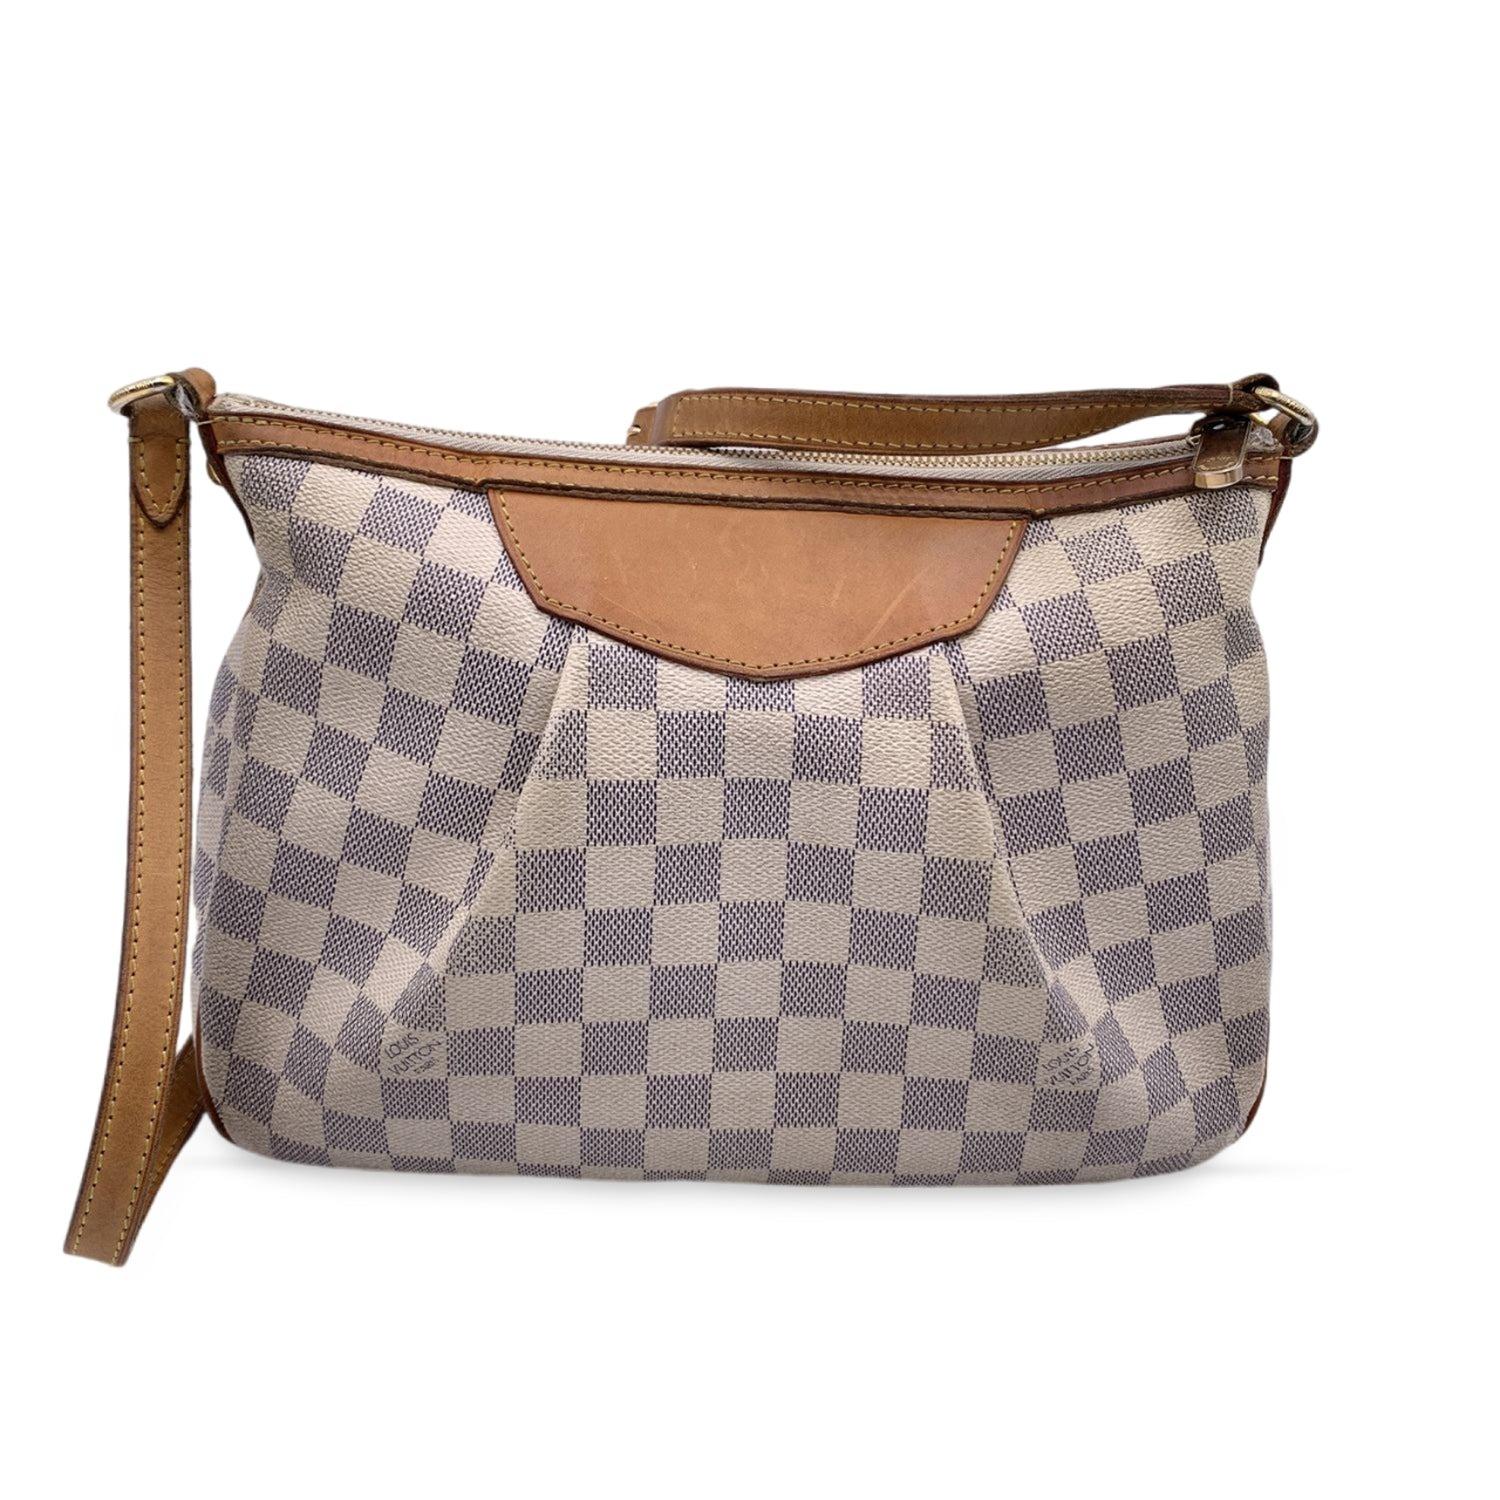 Louis Vuitton shoulder bag 'Siracusa PM' in Damier Azur canvas. Upper zipper closure. Adjustable leather shoulder strap. Beige fabric lining. 2 side open pockets inside. 'LOUIS VUITTON Paris - Made in France' tag inside Condition B - VERY GOOD